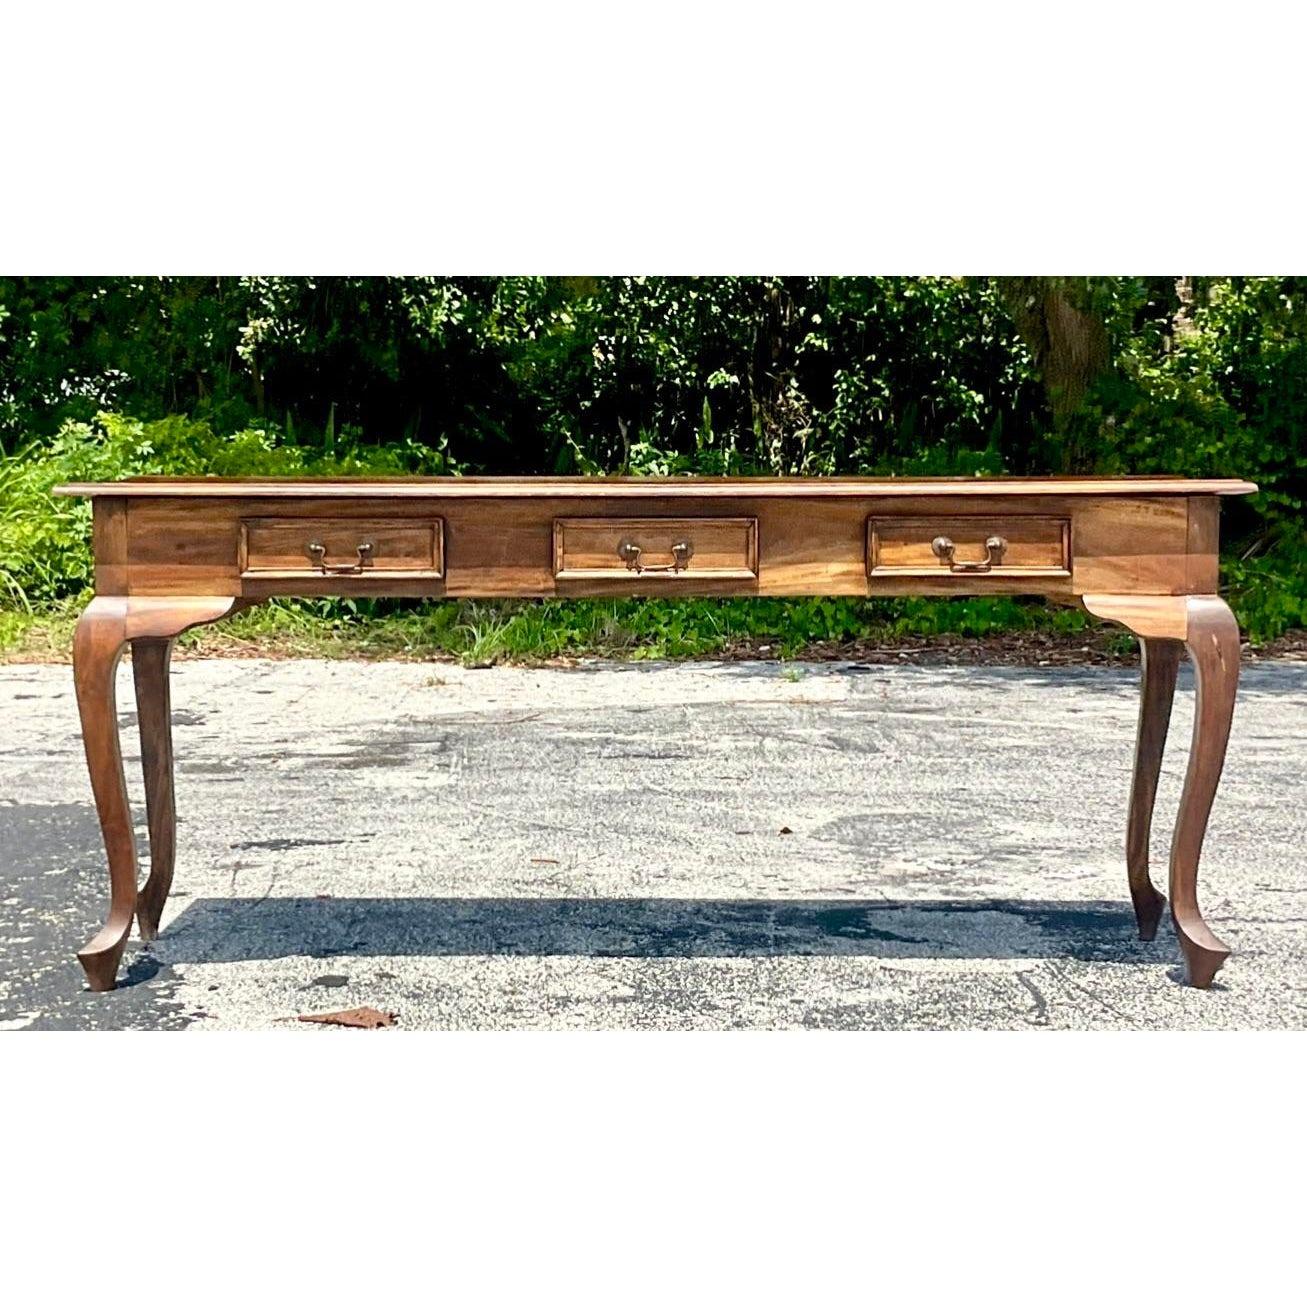 A fabulous vintage Boho console table. A chic teak frame with beautiful wood grain detail. Cabriolet legs and heavy brass hardware. Acquired from a Palm Beach estate